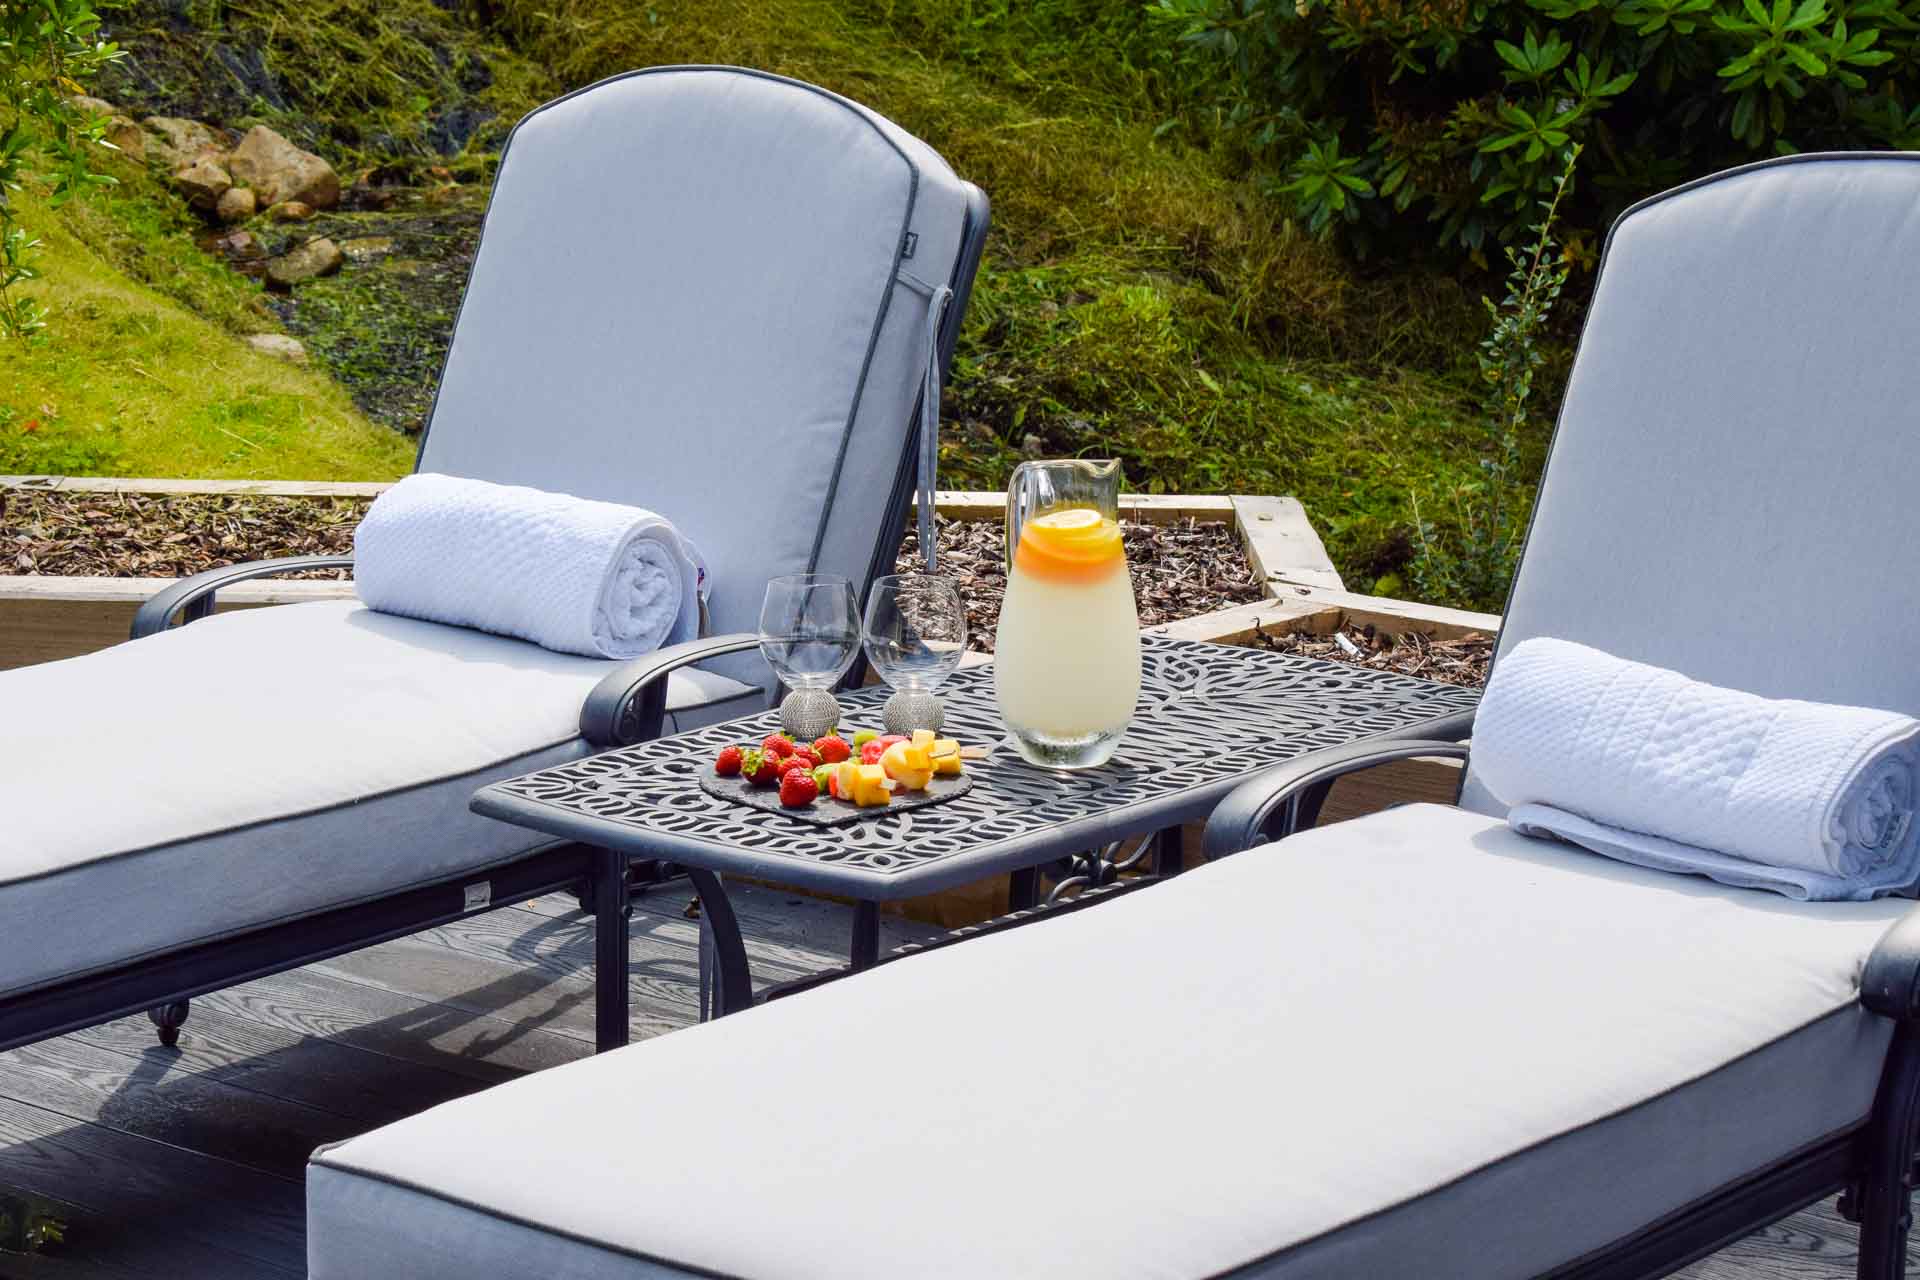 The sunloungers at Little Fox Lodge Hideaway are perfect for summertime.